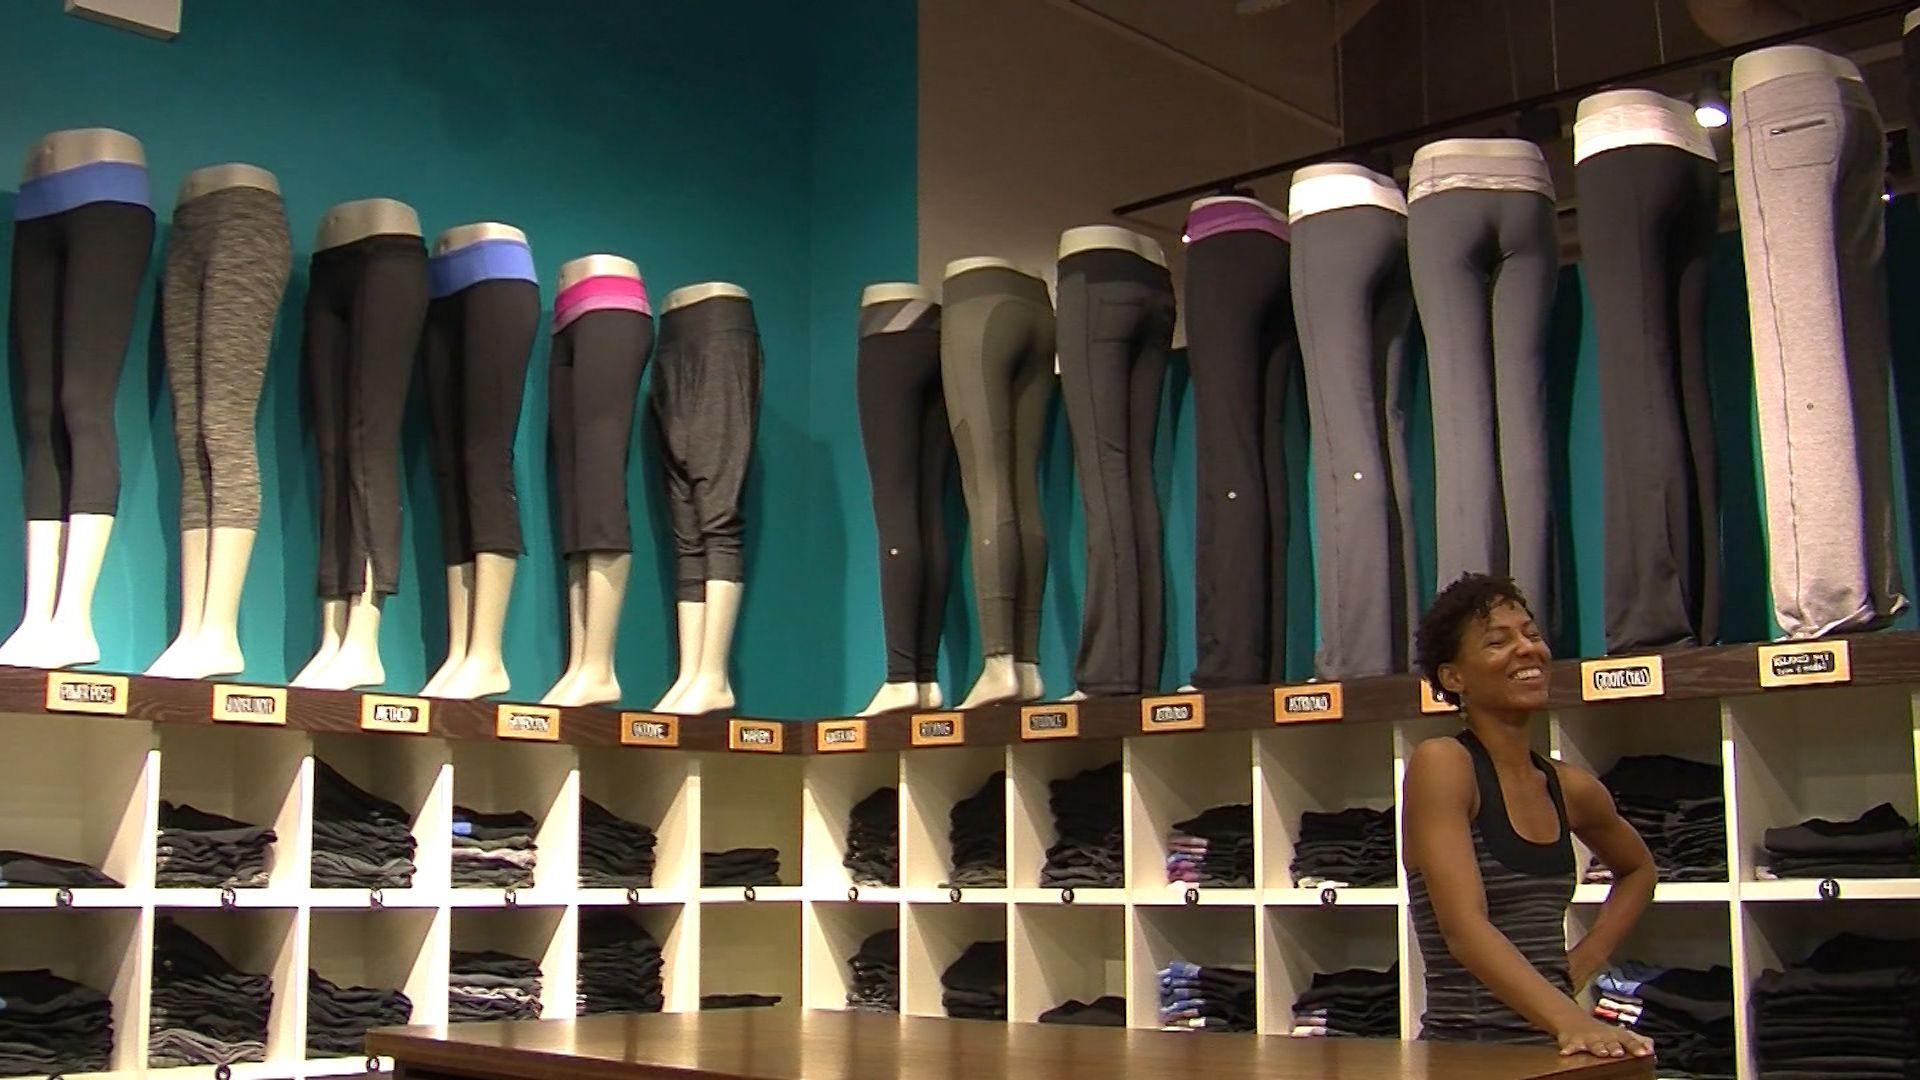 The future of Lululemon: Men's clothes, shampoo and bags